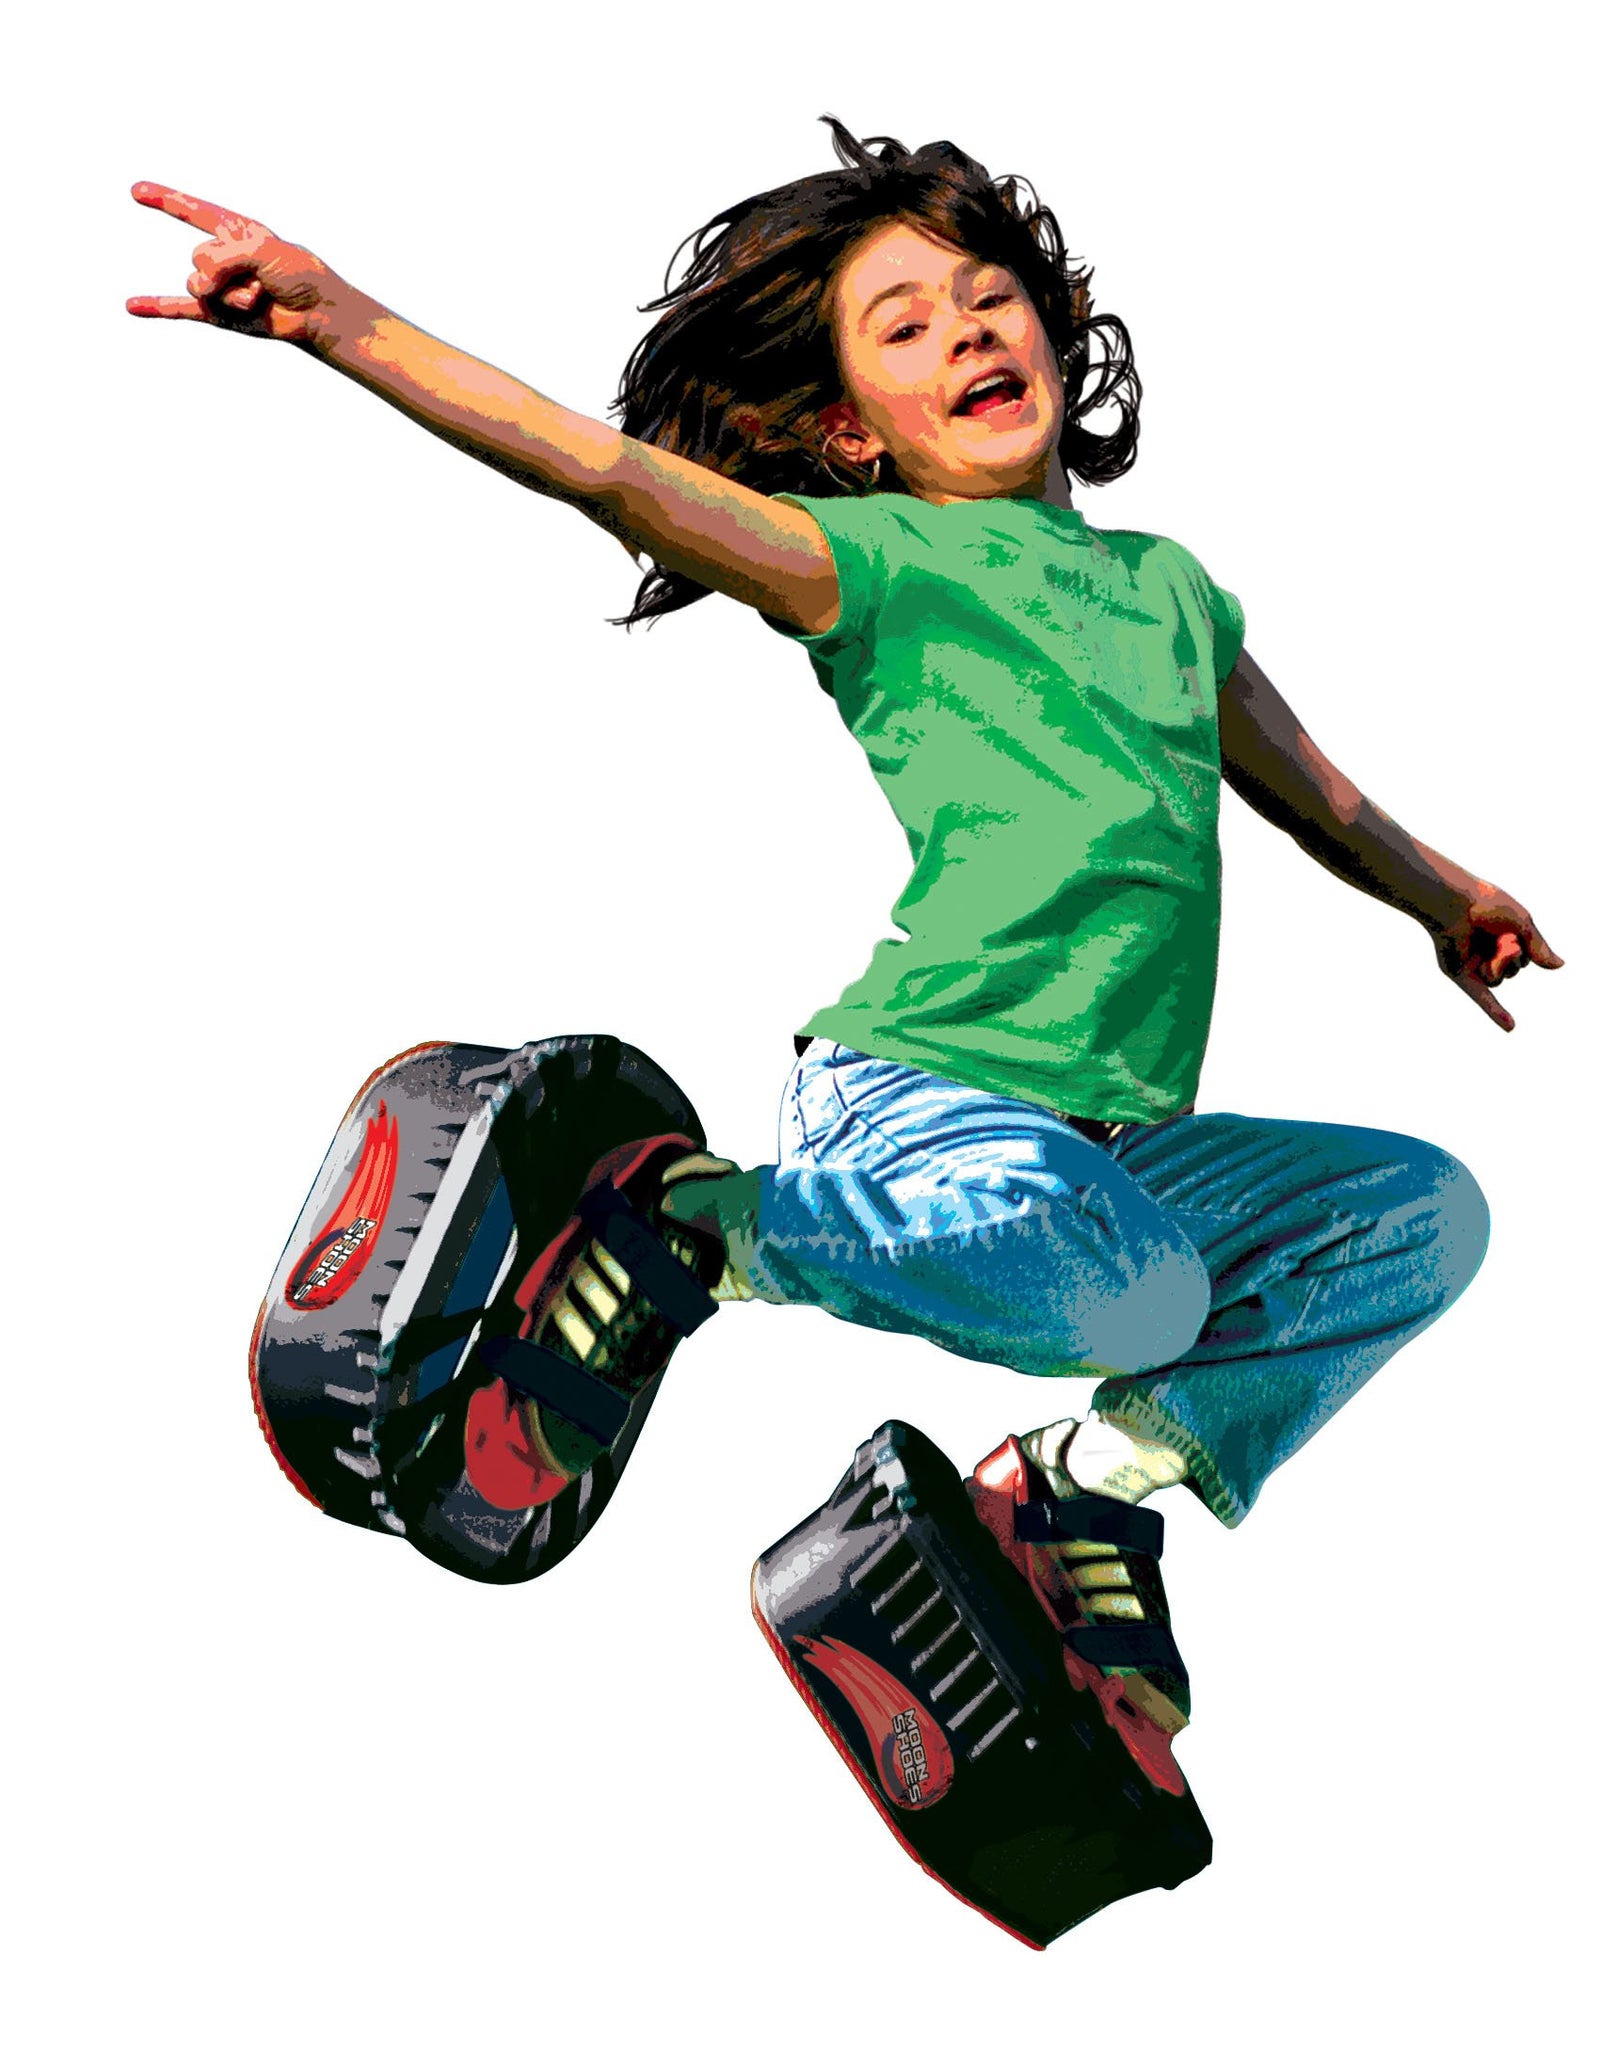 Big Time Toys Moon Shoes Bouncy Shoes, Mini Trampolines For your Feet, One Size, Black, New and improved, Bounce your way to fun, Very durable, No tool assembly, Athletic development, up to 160 lbs